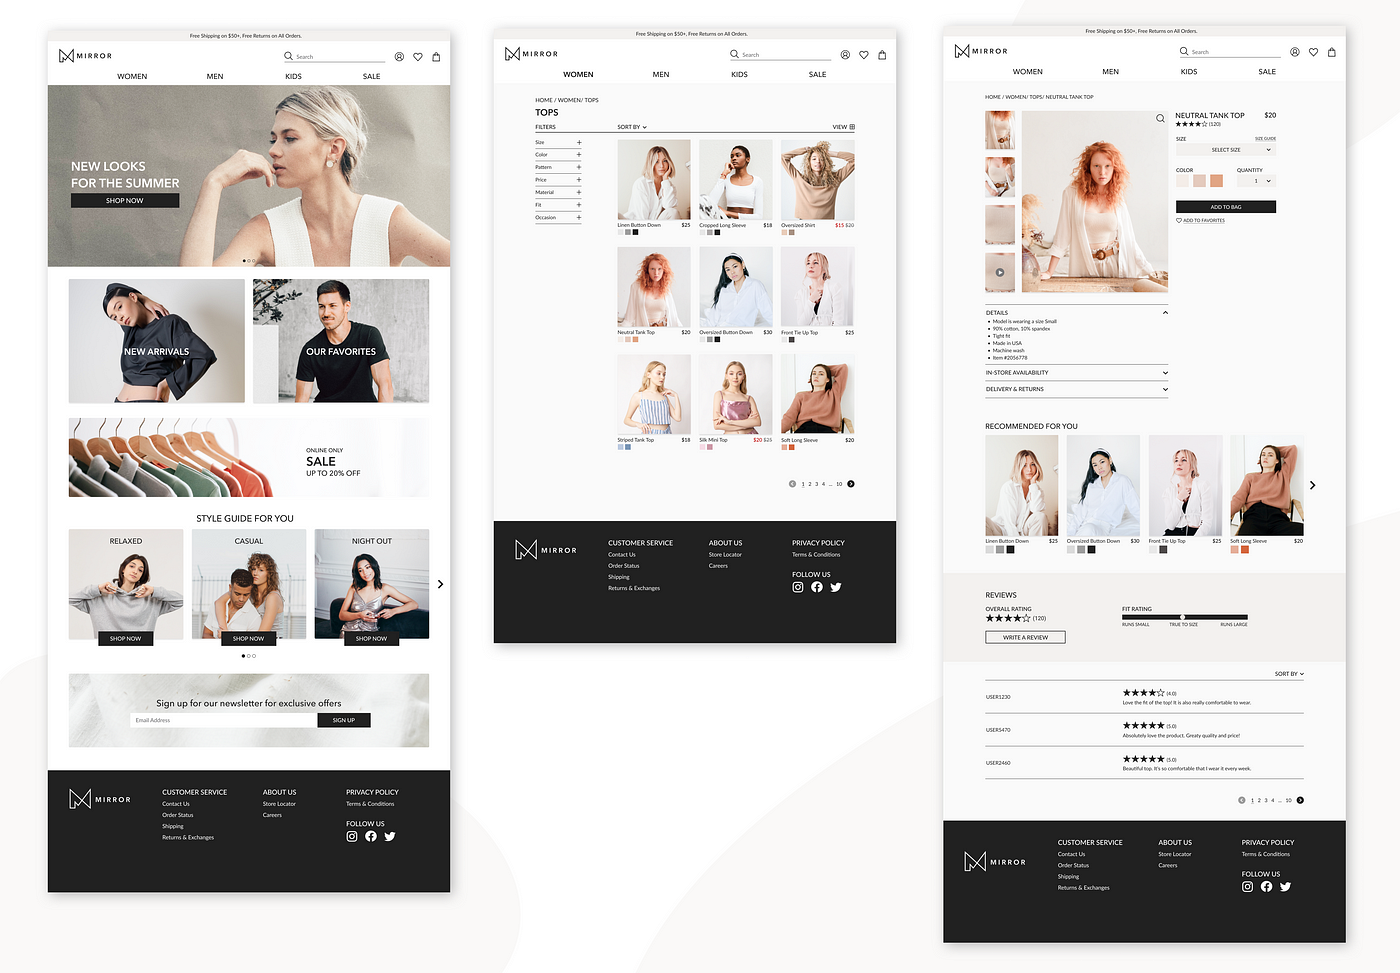 How I designed a fashion e-commerce website- a UX case study, by Kate Choi